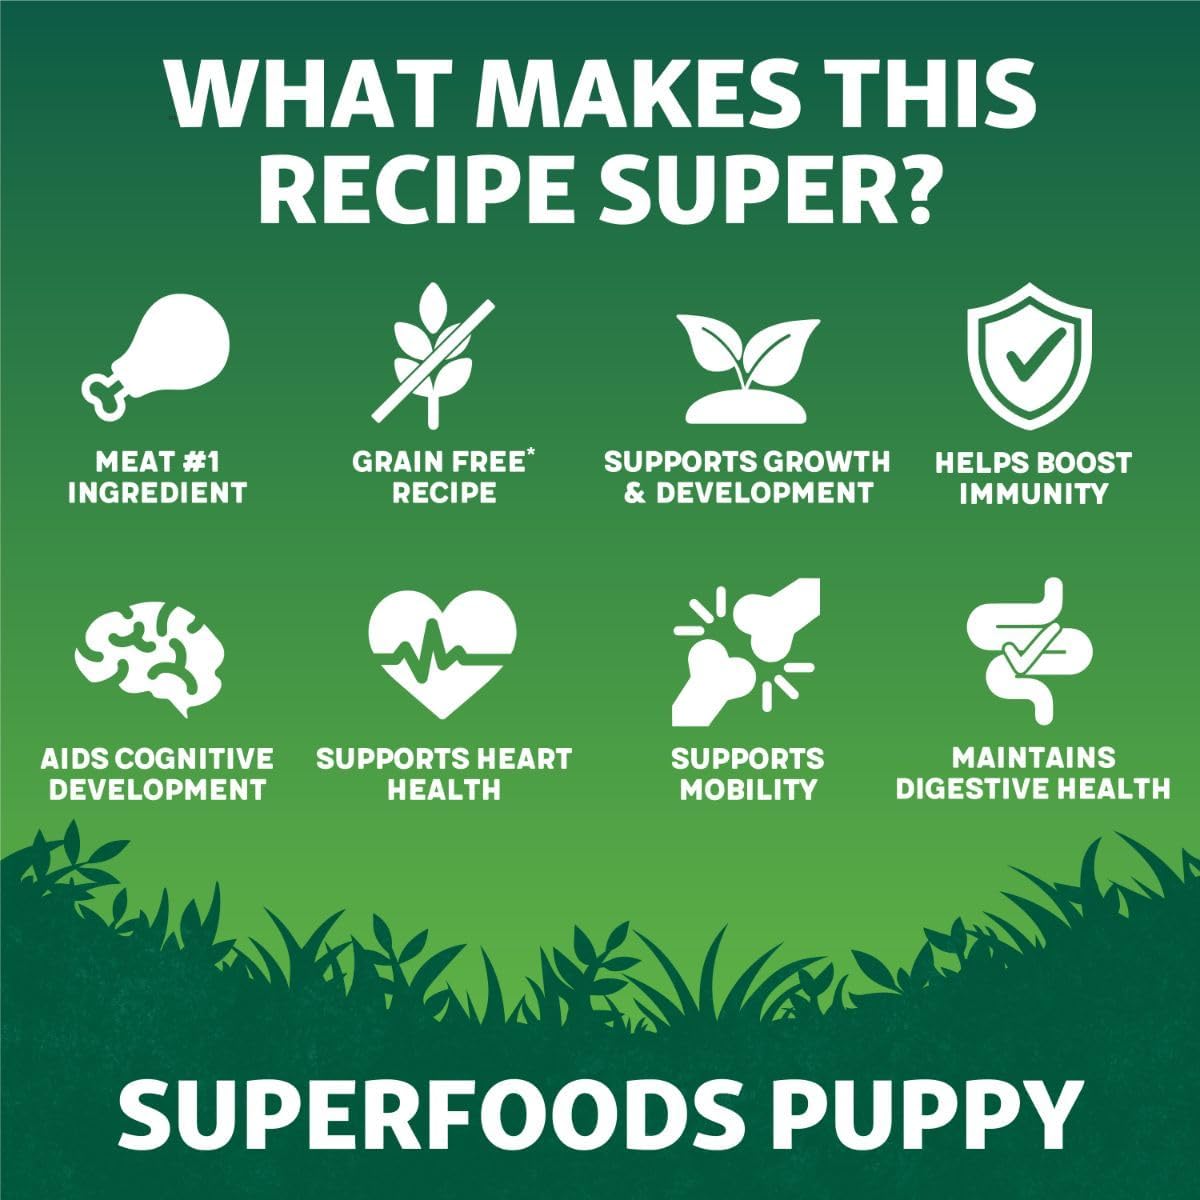 Harringtons Superfoods Puppy Complete Grain Free Hypoallergenic Chicken with Veg Dry Dog Food 10kg - Made with All Natural Ingredients :Pet Supplies